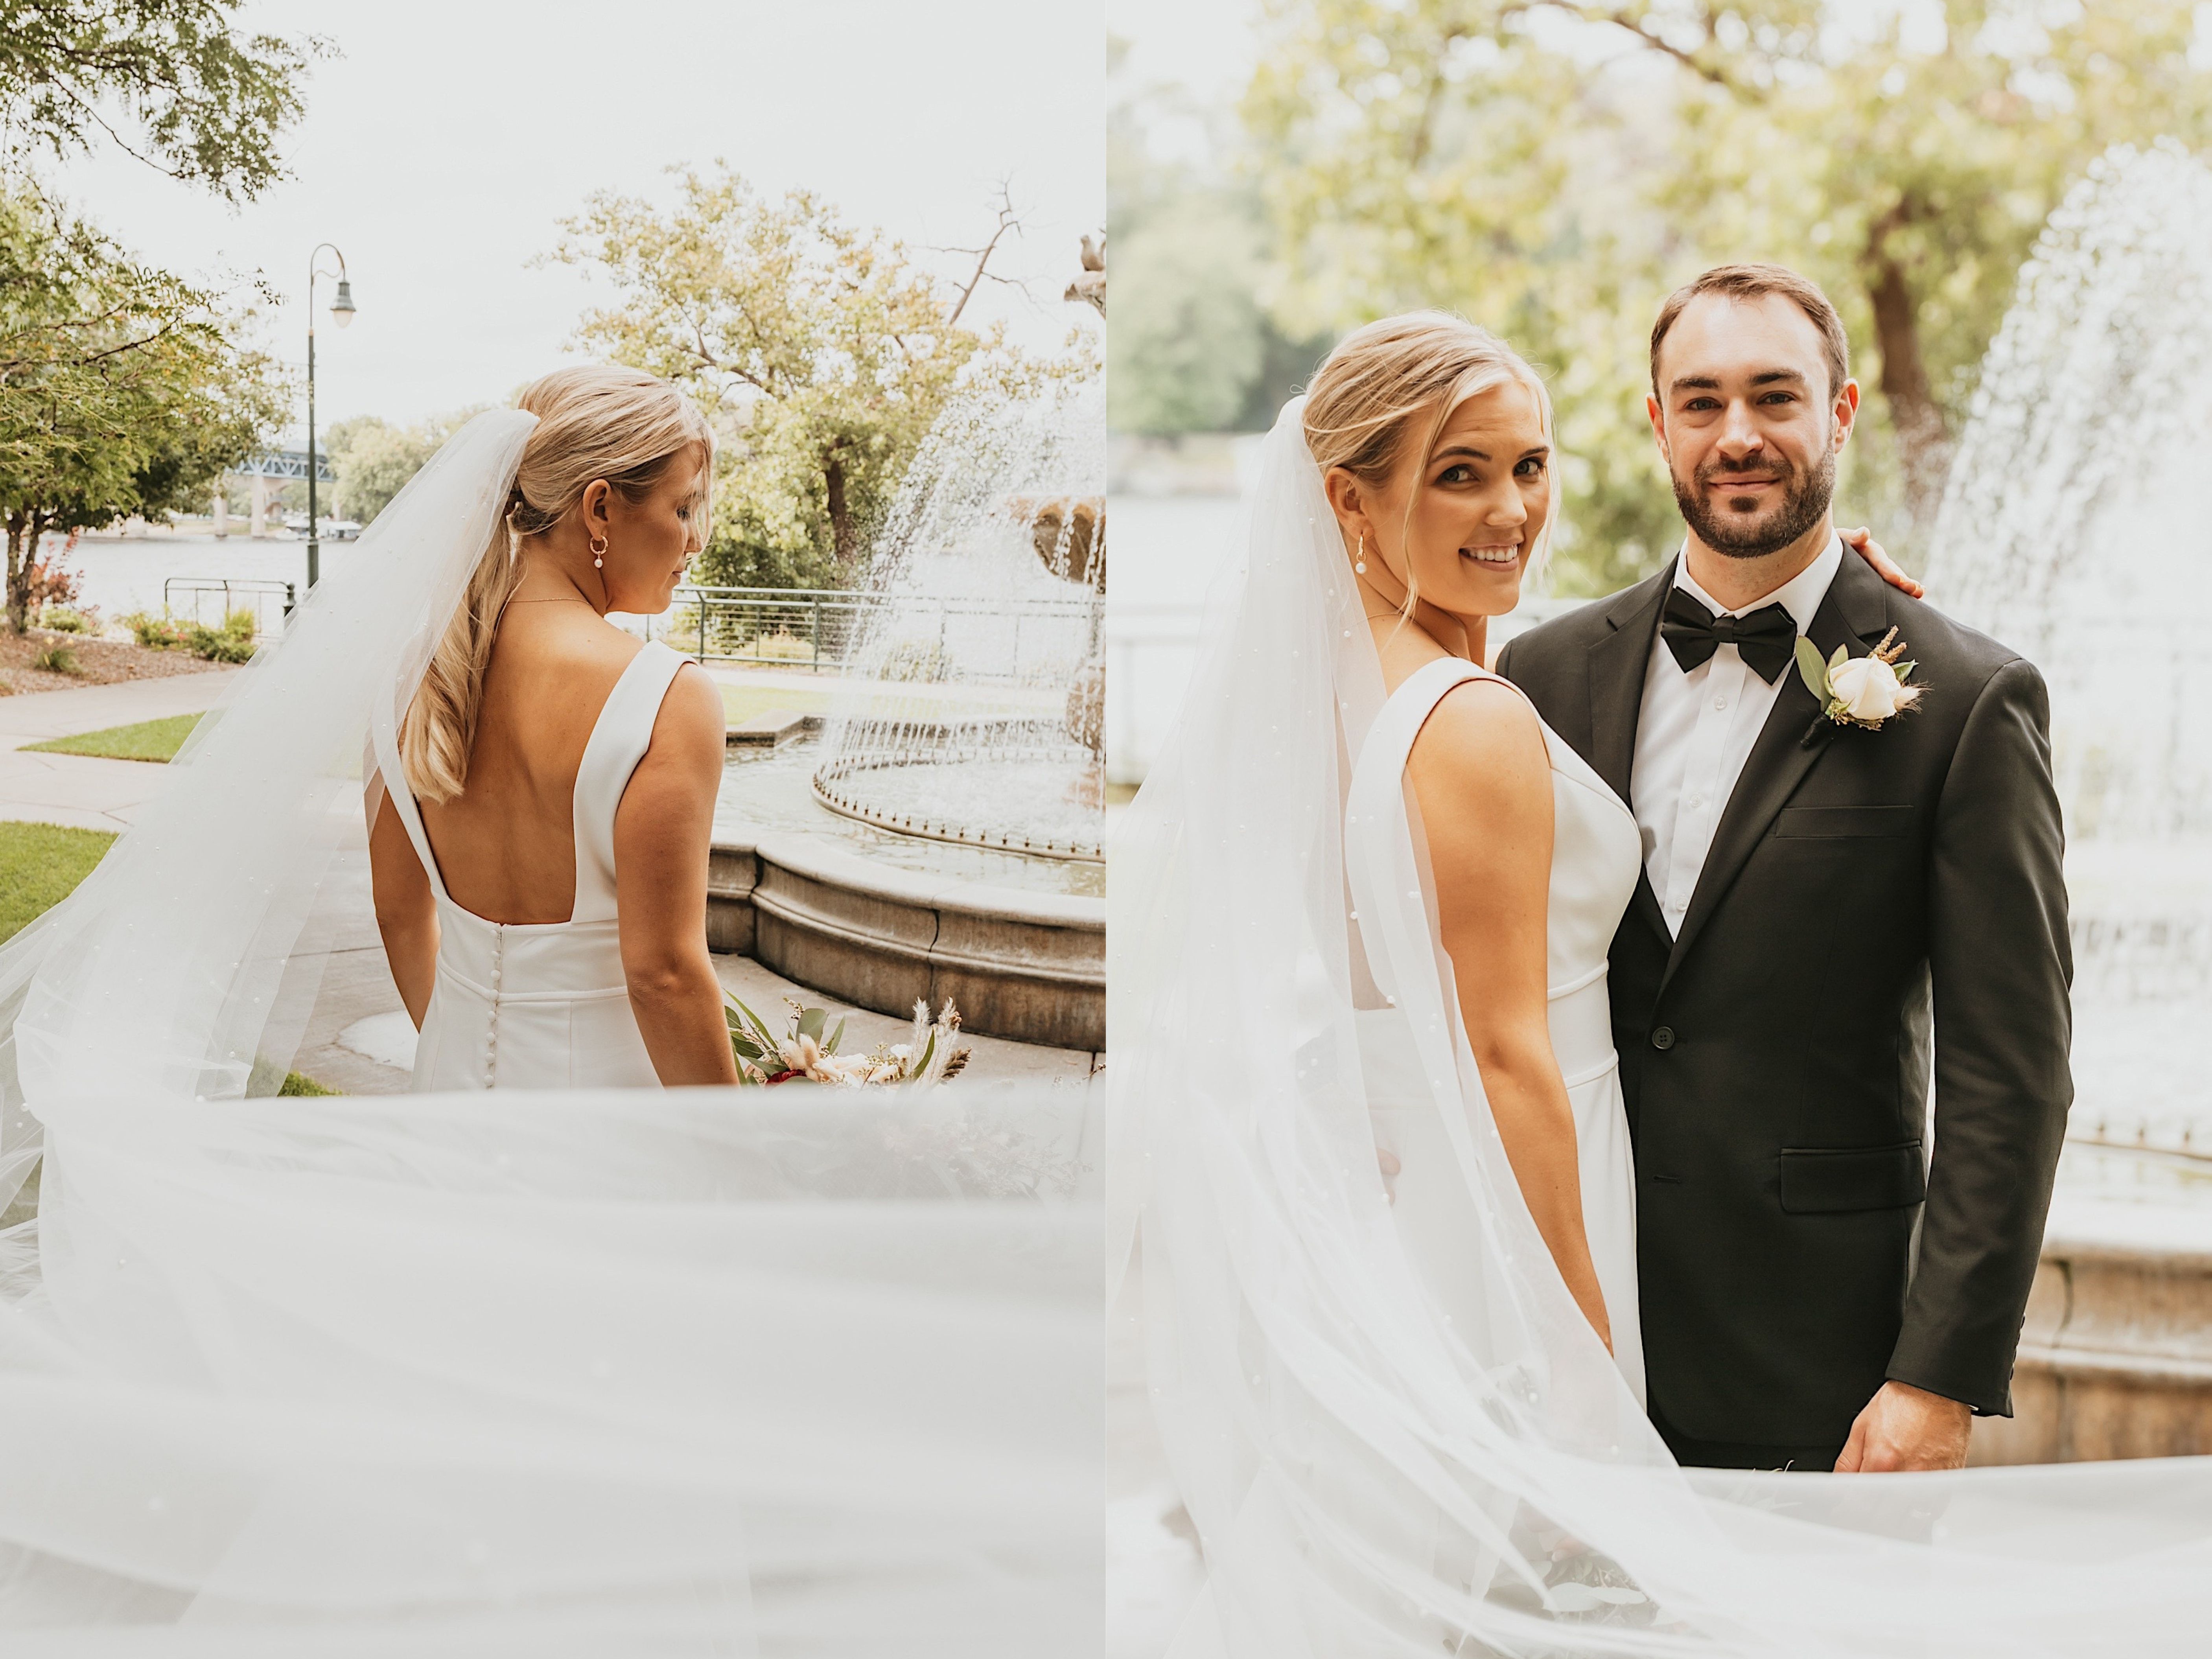 2 photos side by side, the left is of a bride with her back to the camera in front of a fountain, the right is of the bride and groom in front of a fountain smiling at the camera